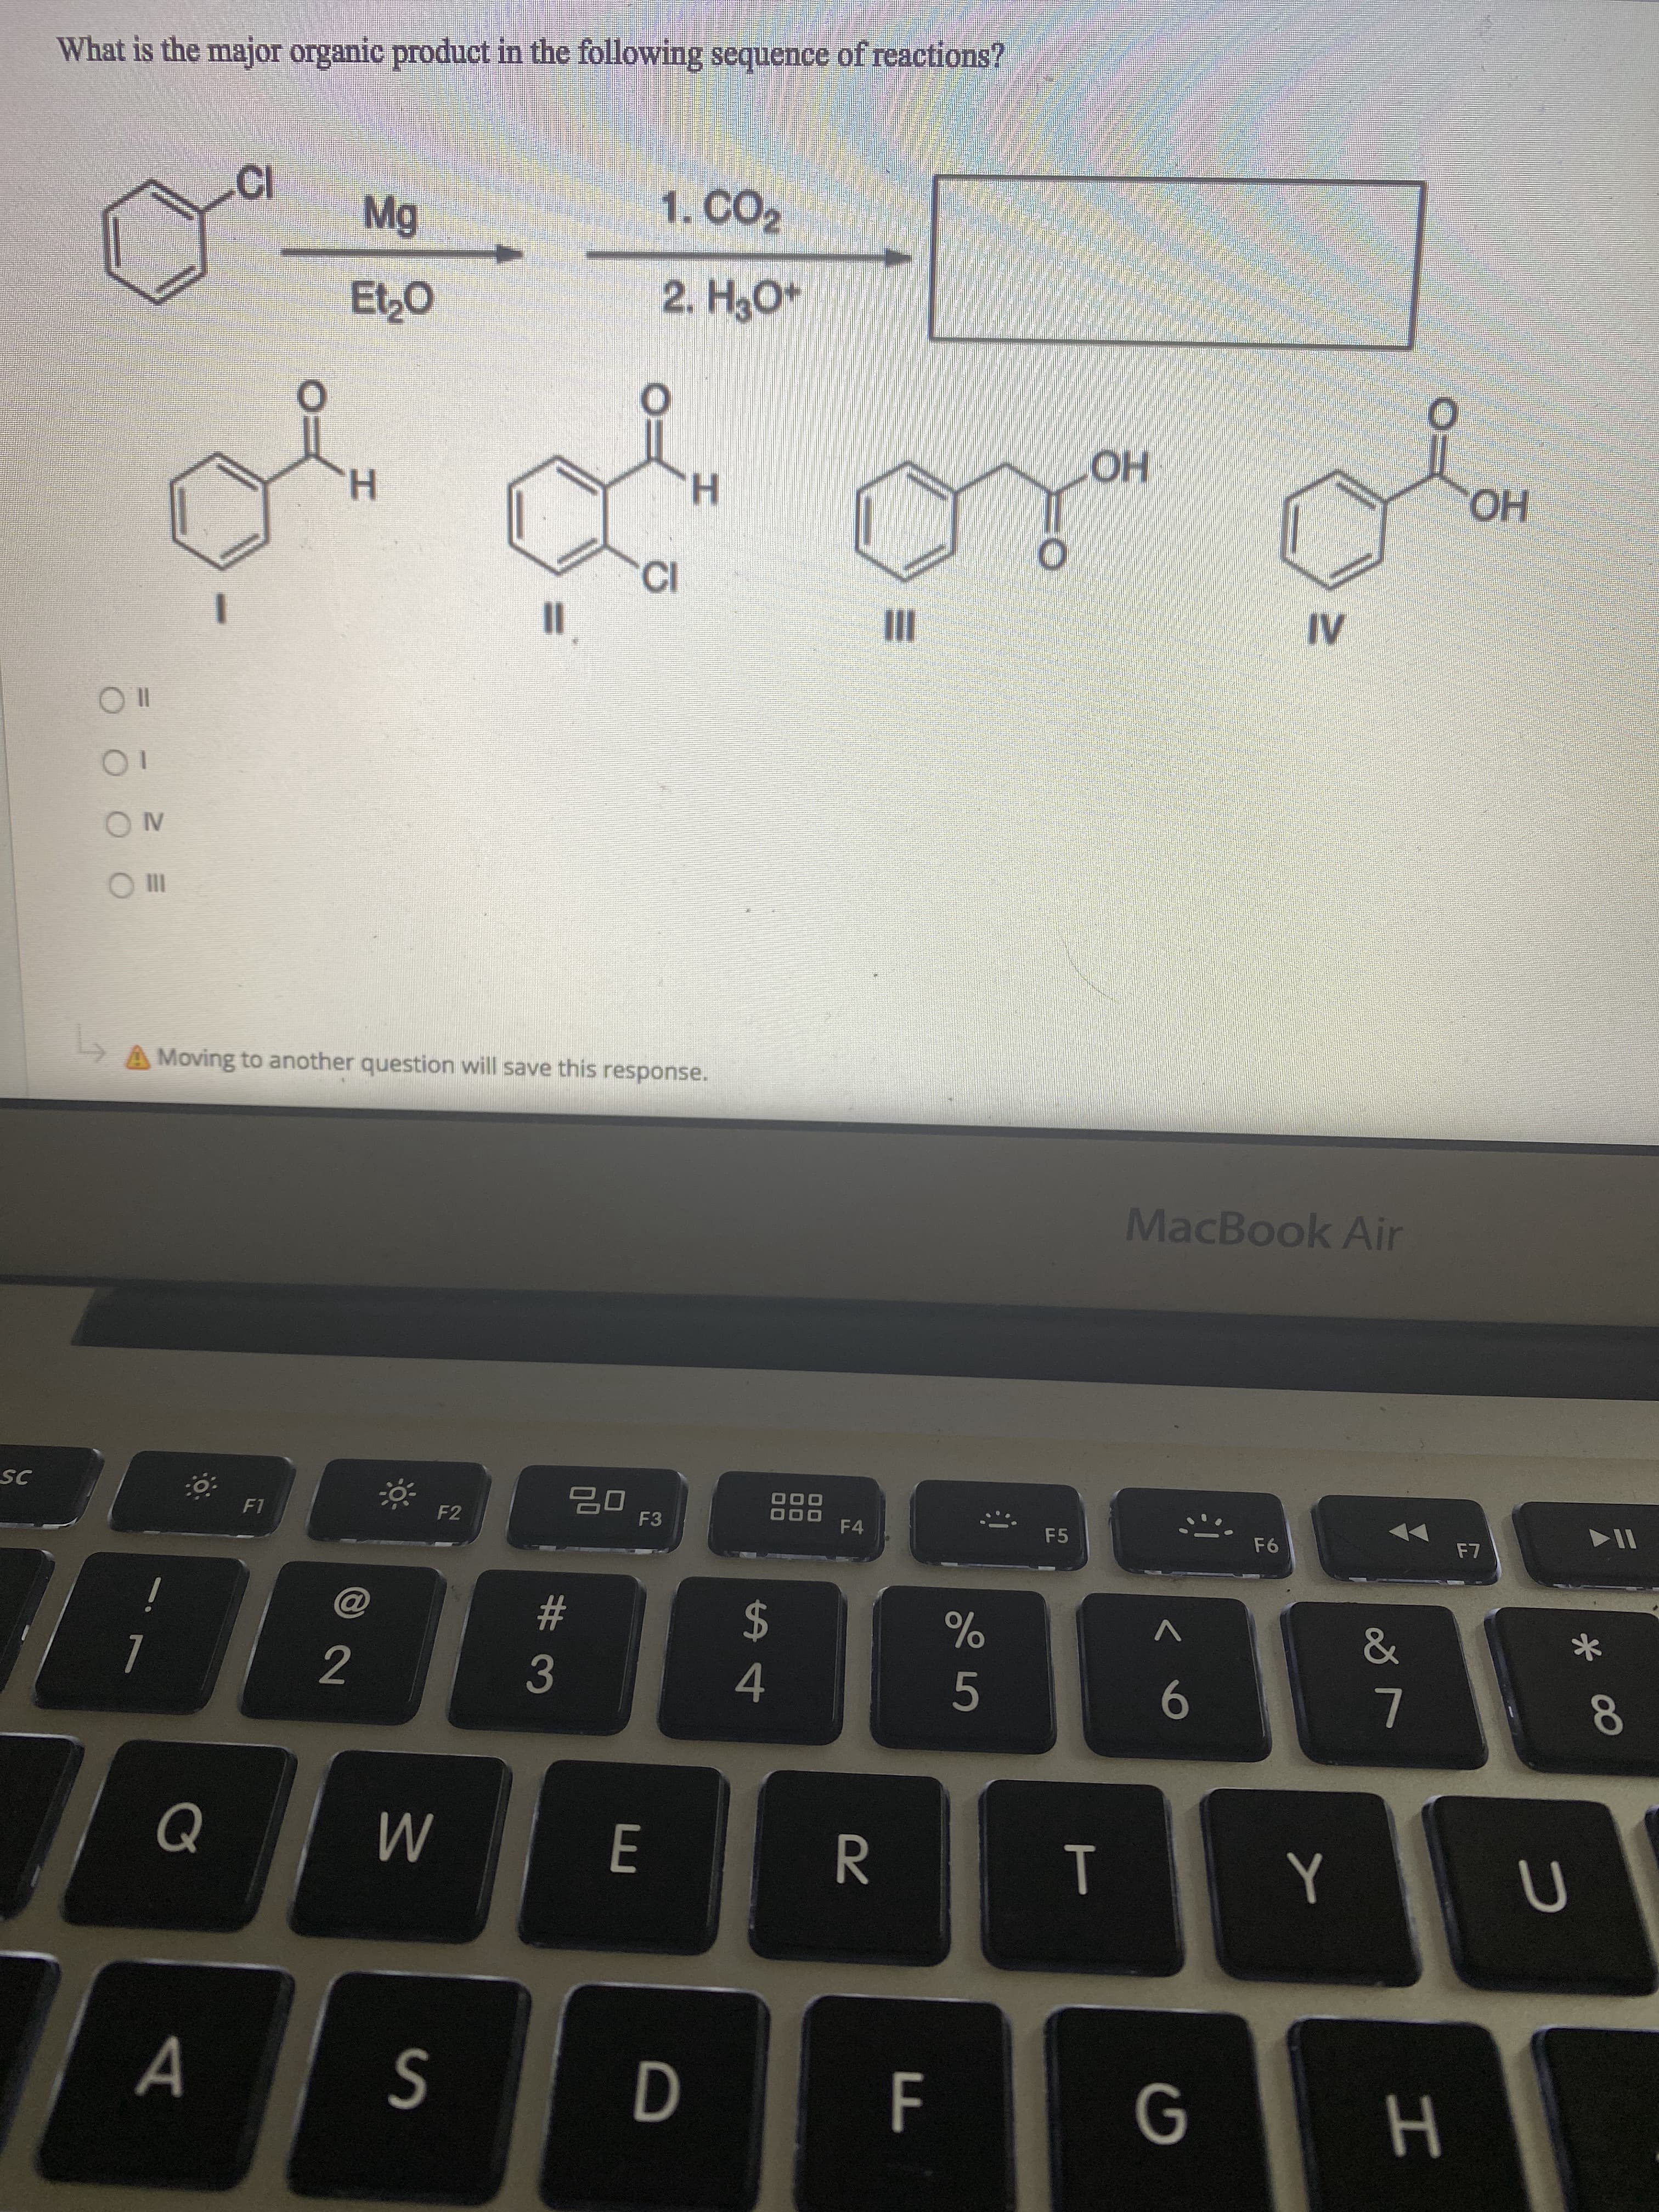 What is the major organic product in the following sequence of reactions?
